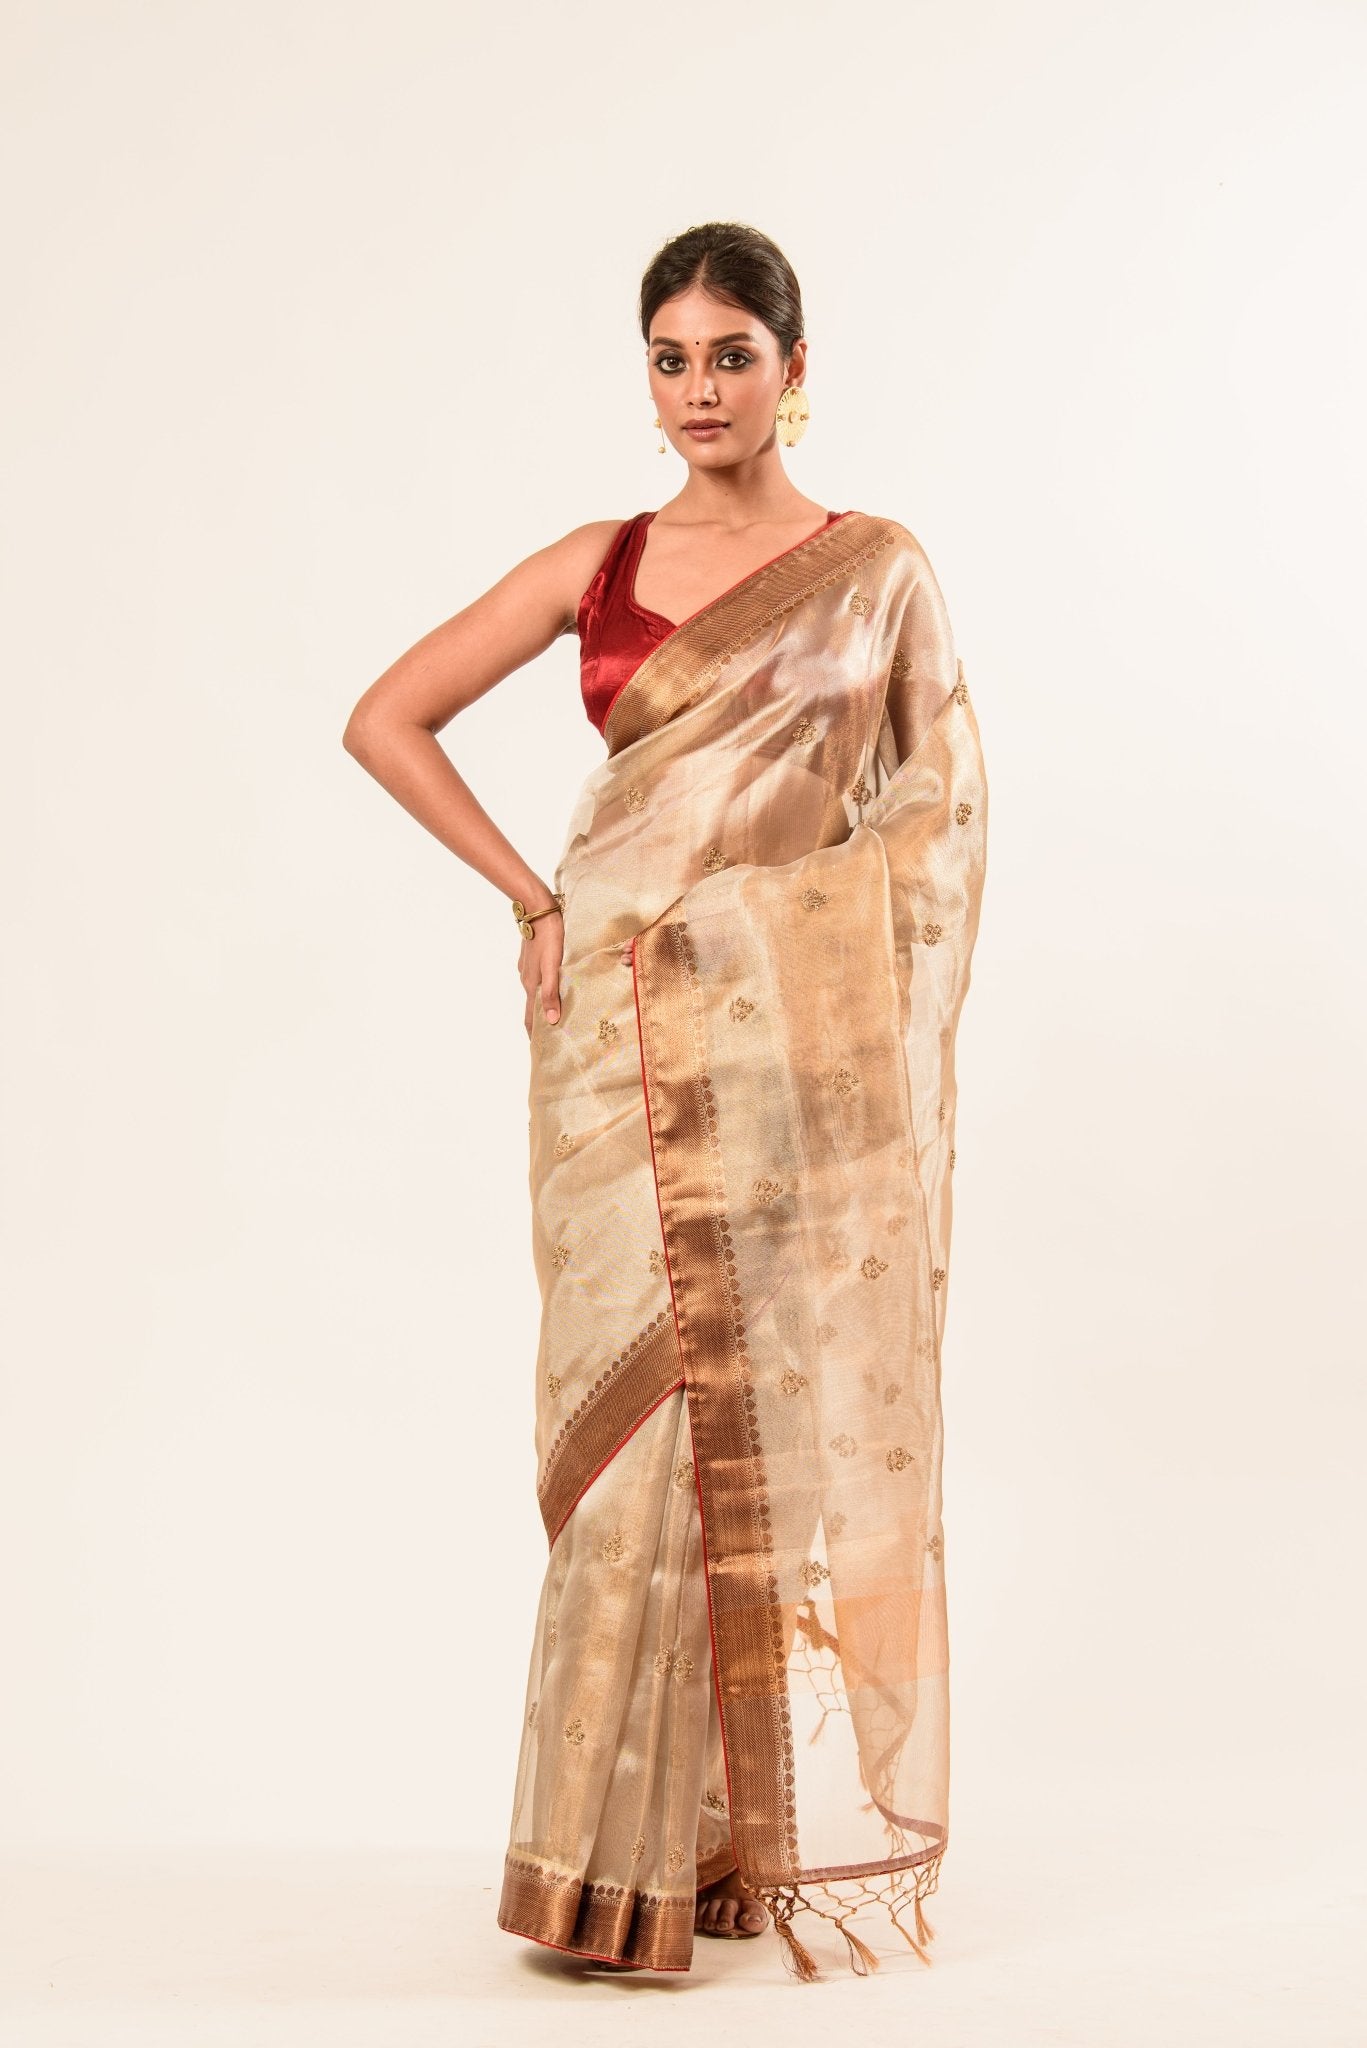 Red and Gold Tissue Silk Saree in Cut Dana Embroidery work - Anvi Couture